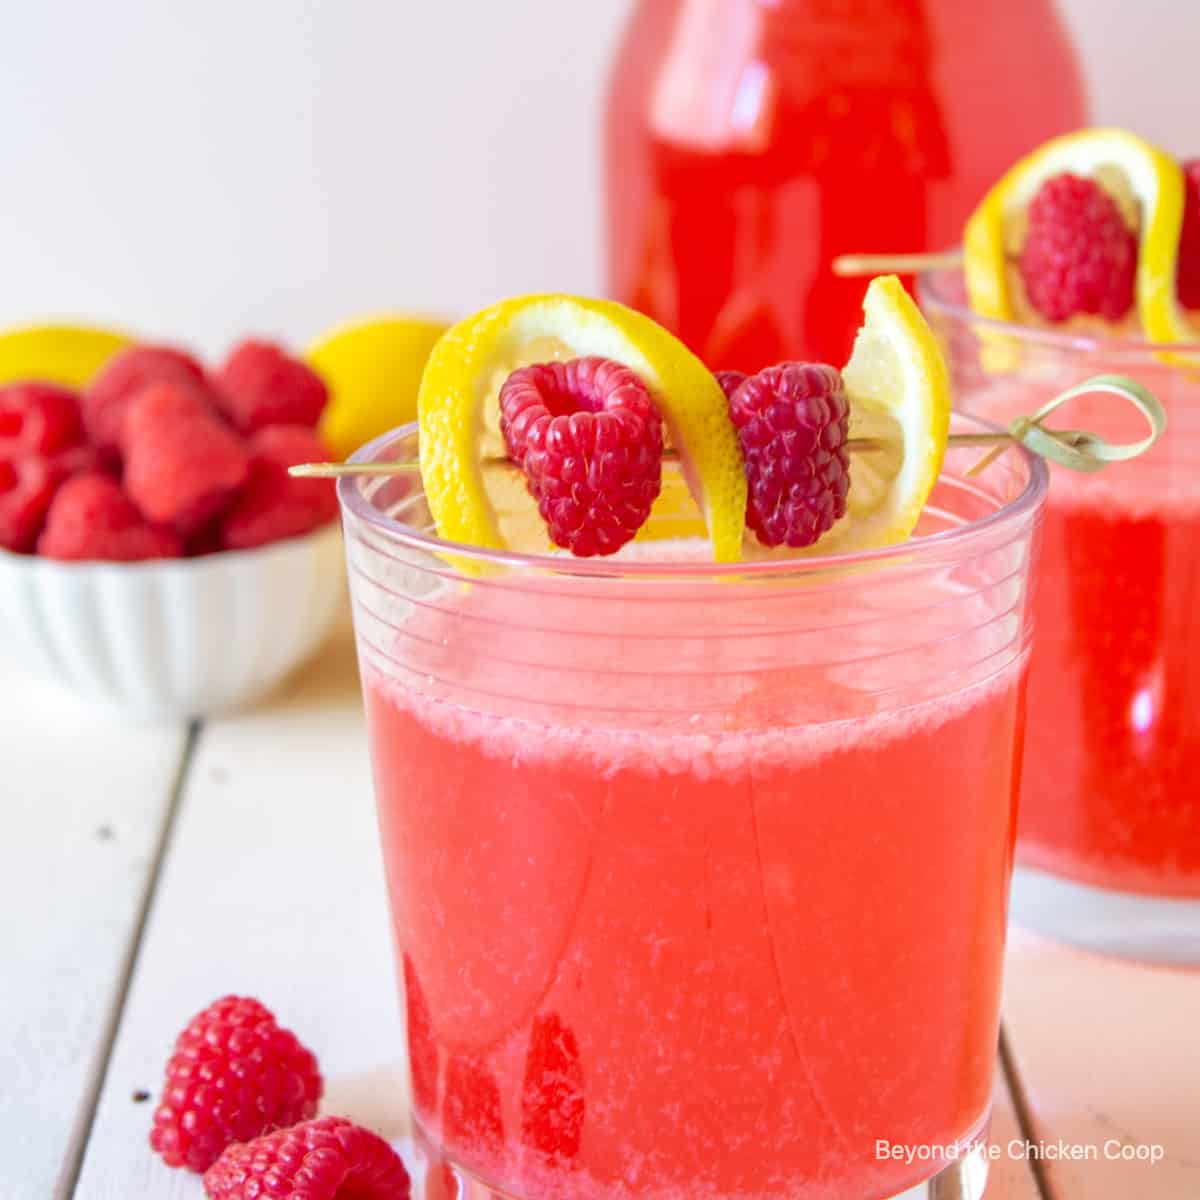 A glass of pink lemonade topped with a lemon twist and rapsberries.